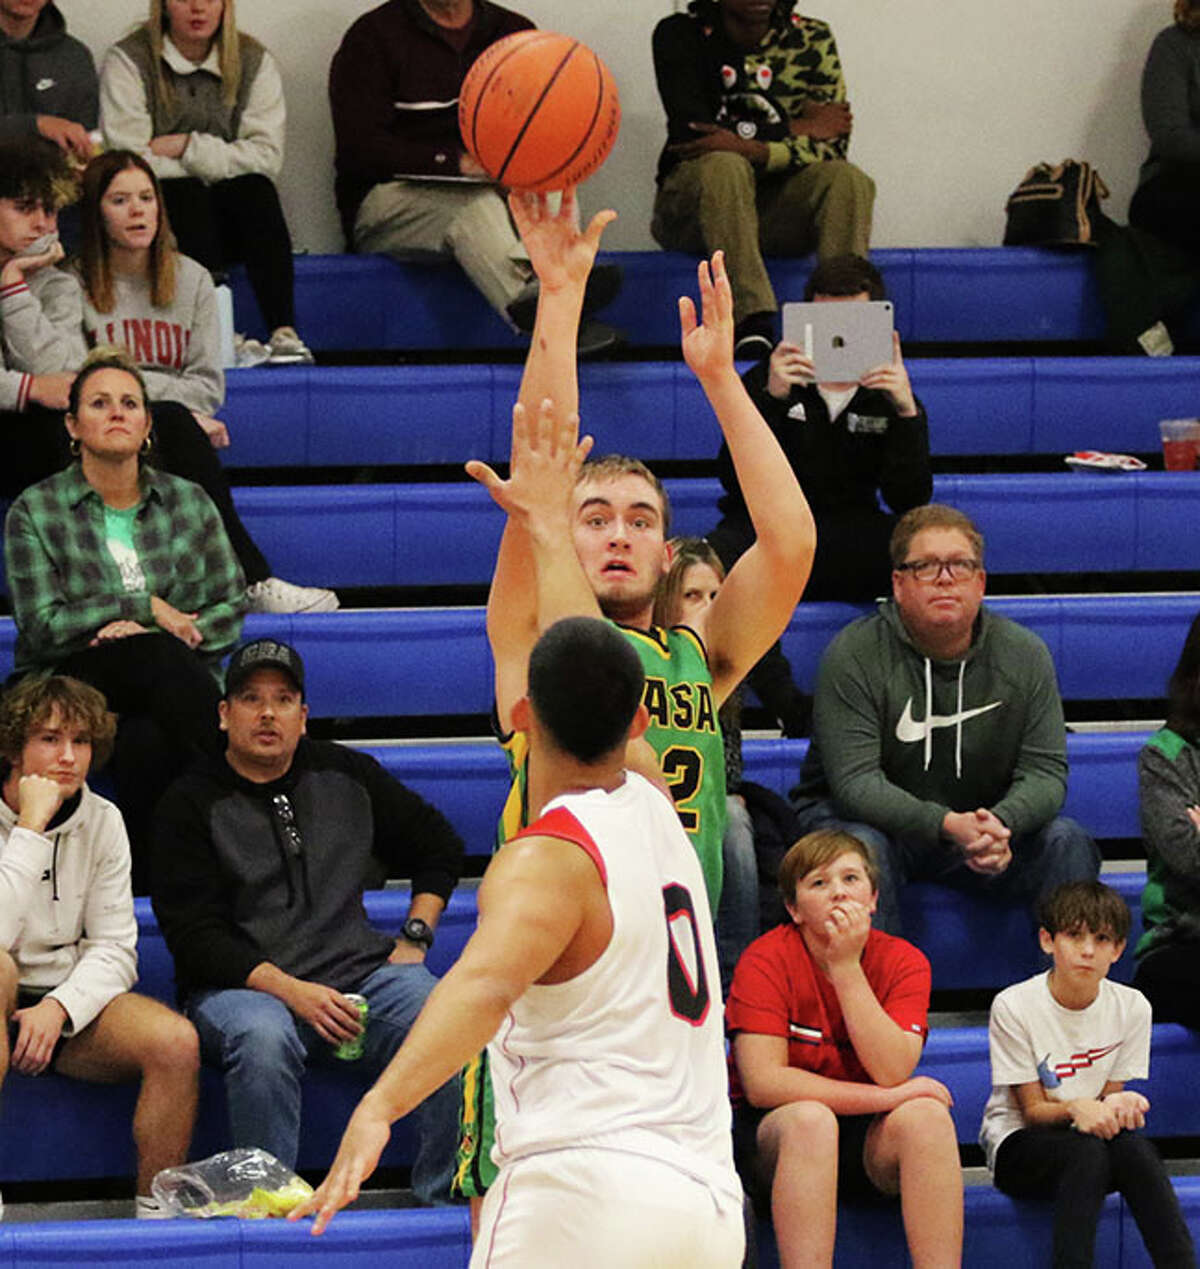 Southwestern's Ryan Lowis shoots over Gateway Christian Academy's Isaac Salas to make one of his four 3-pointers in the first half Monday night in the Hoopsgiving Classic at Roxana.